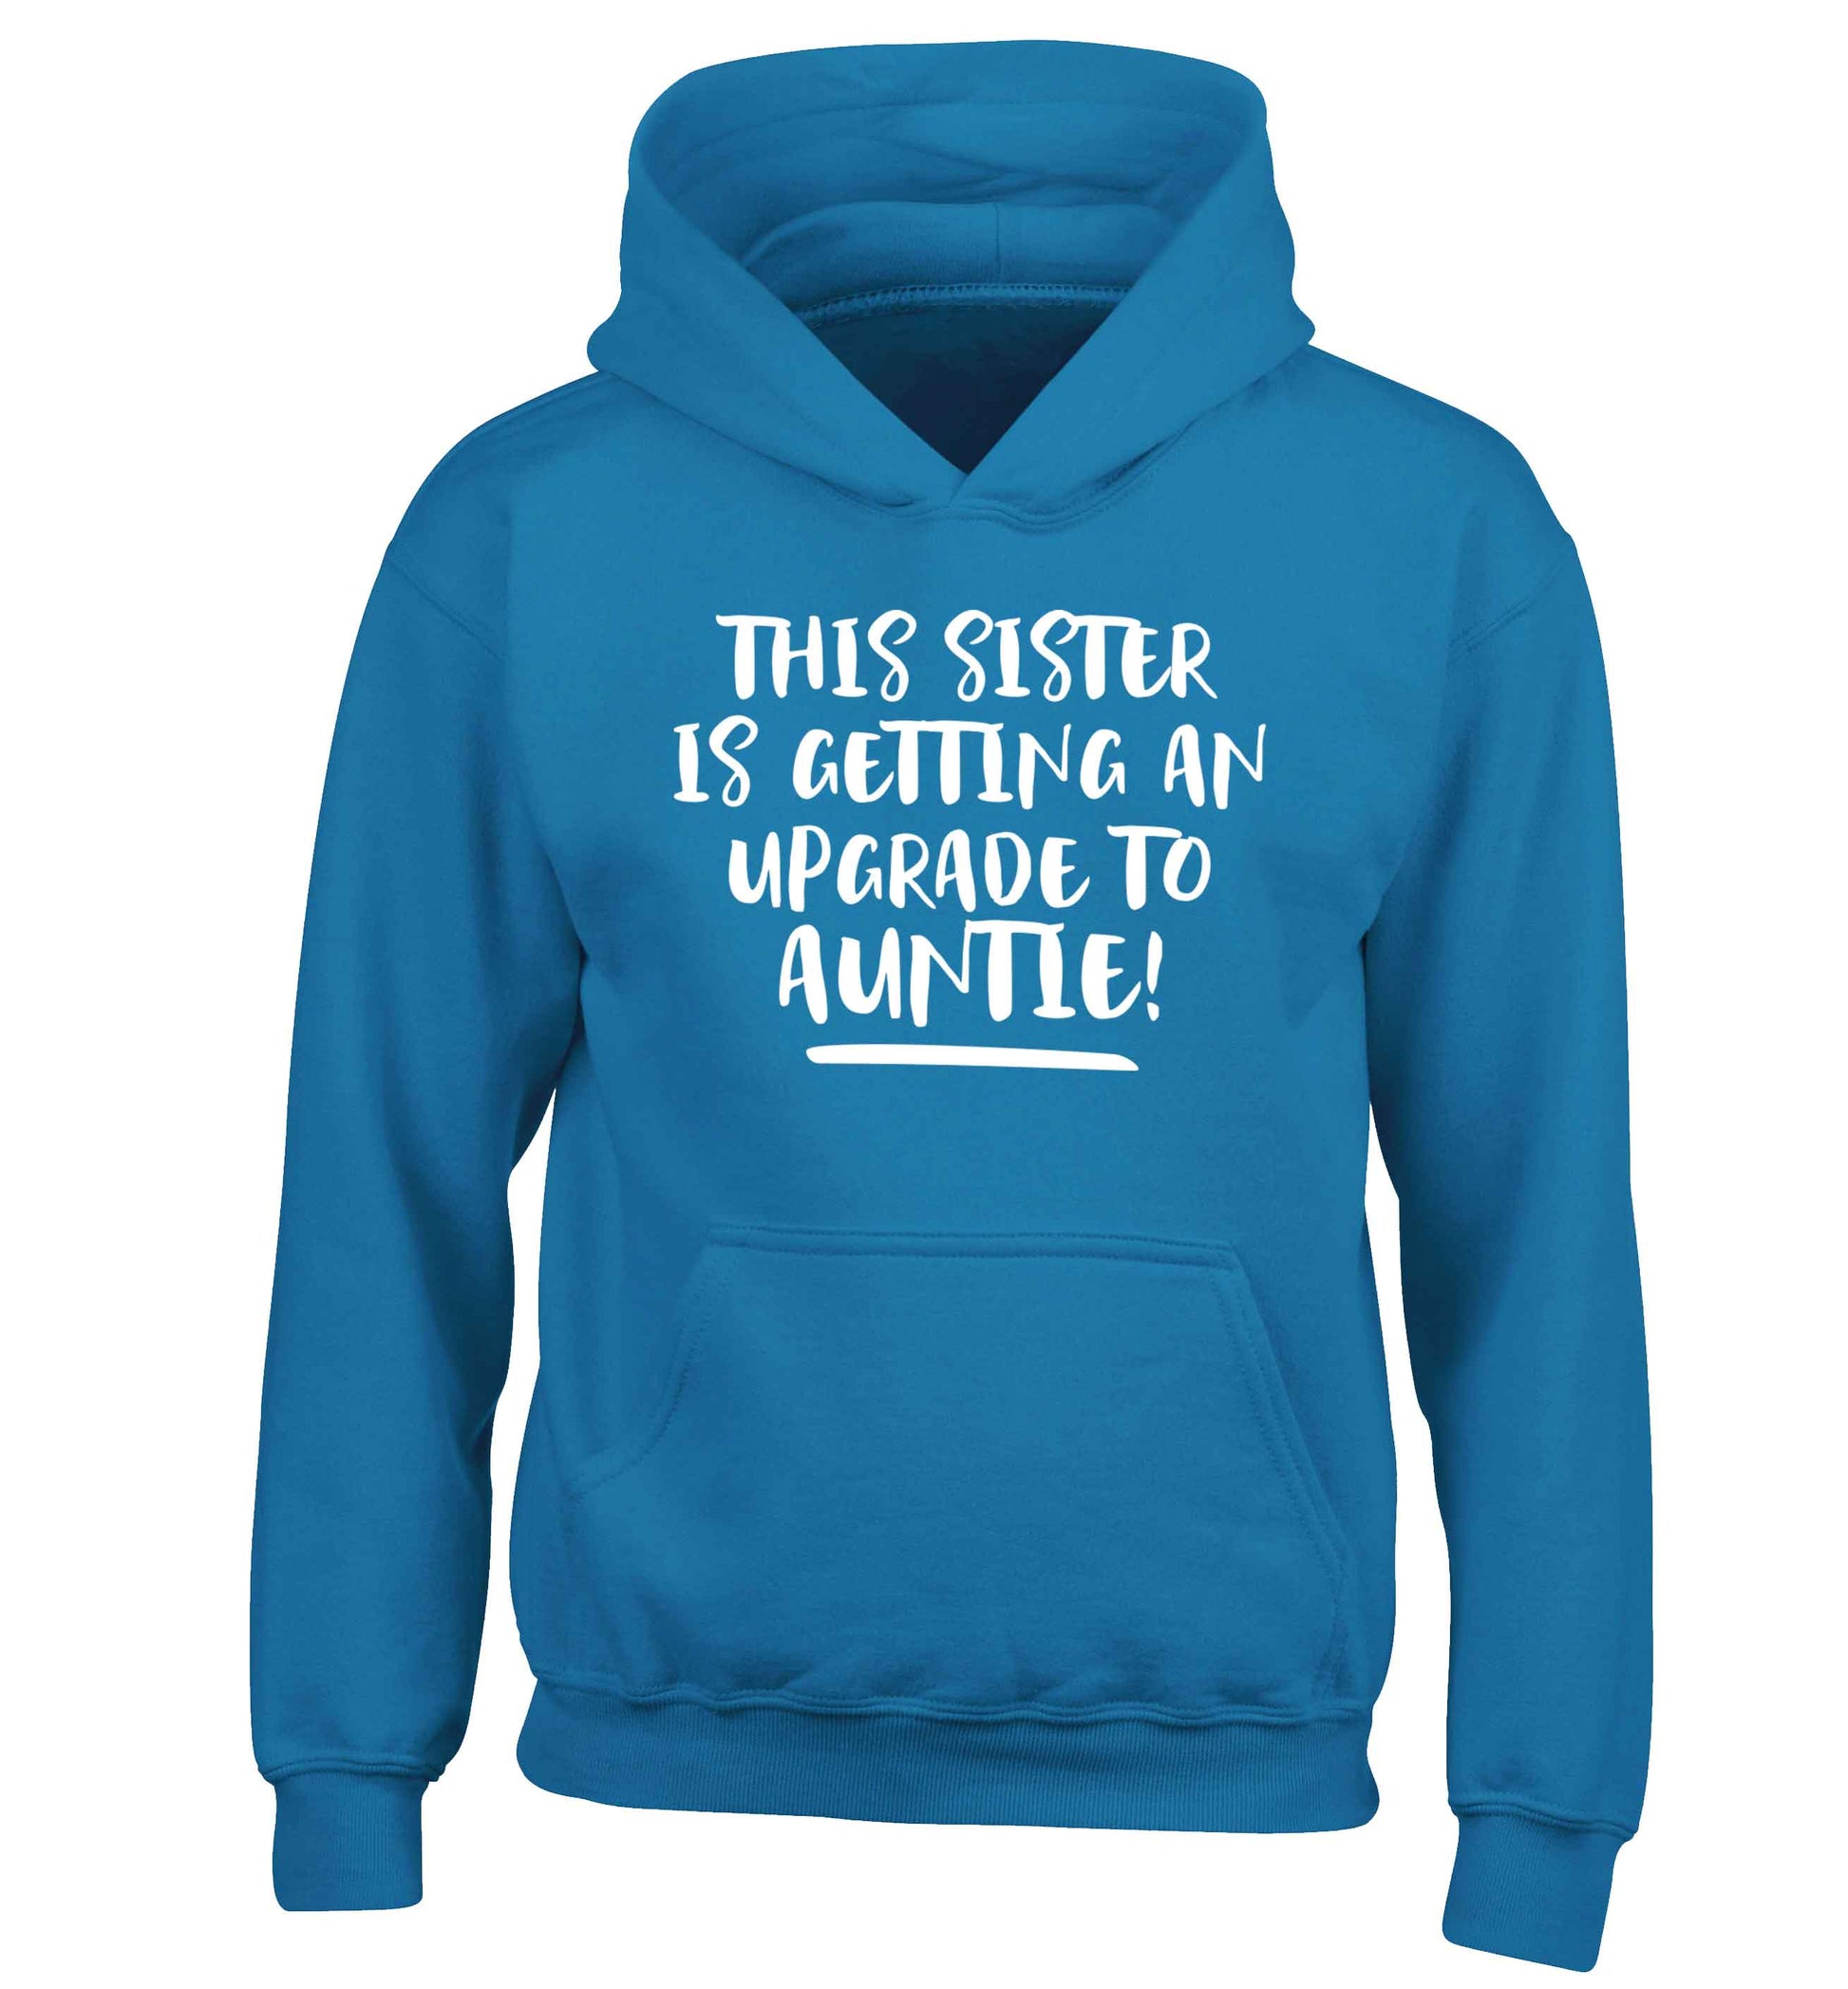 This sister is getting an upgrade to auntie! children's blue hoodie 12-13 Years